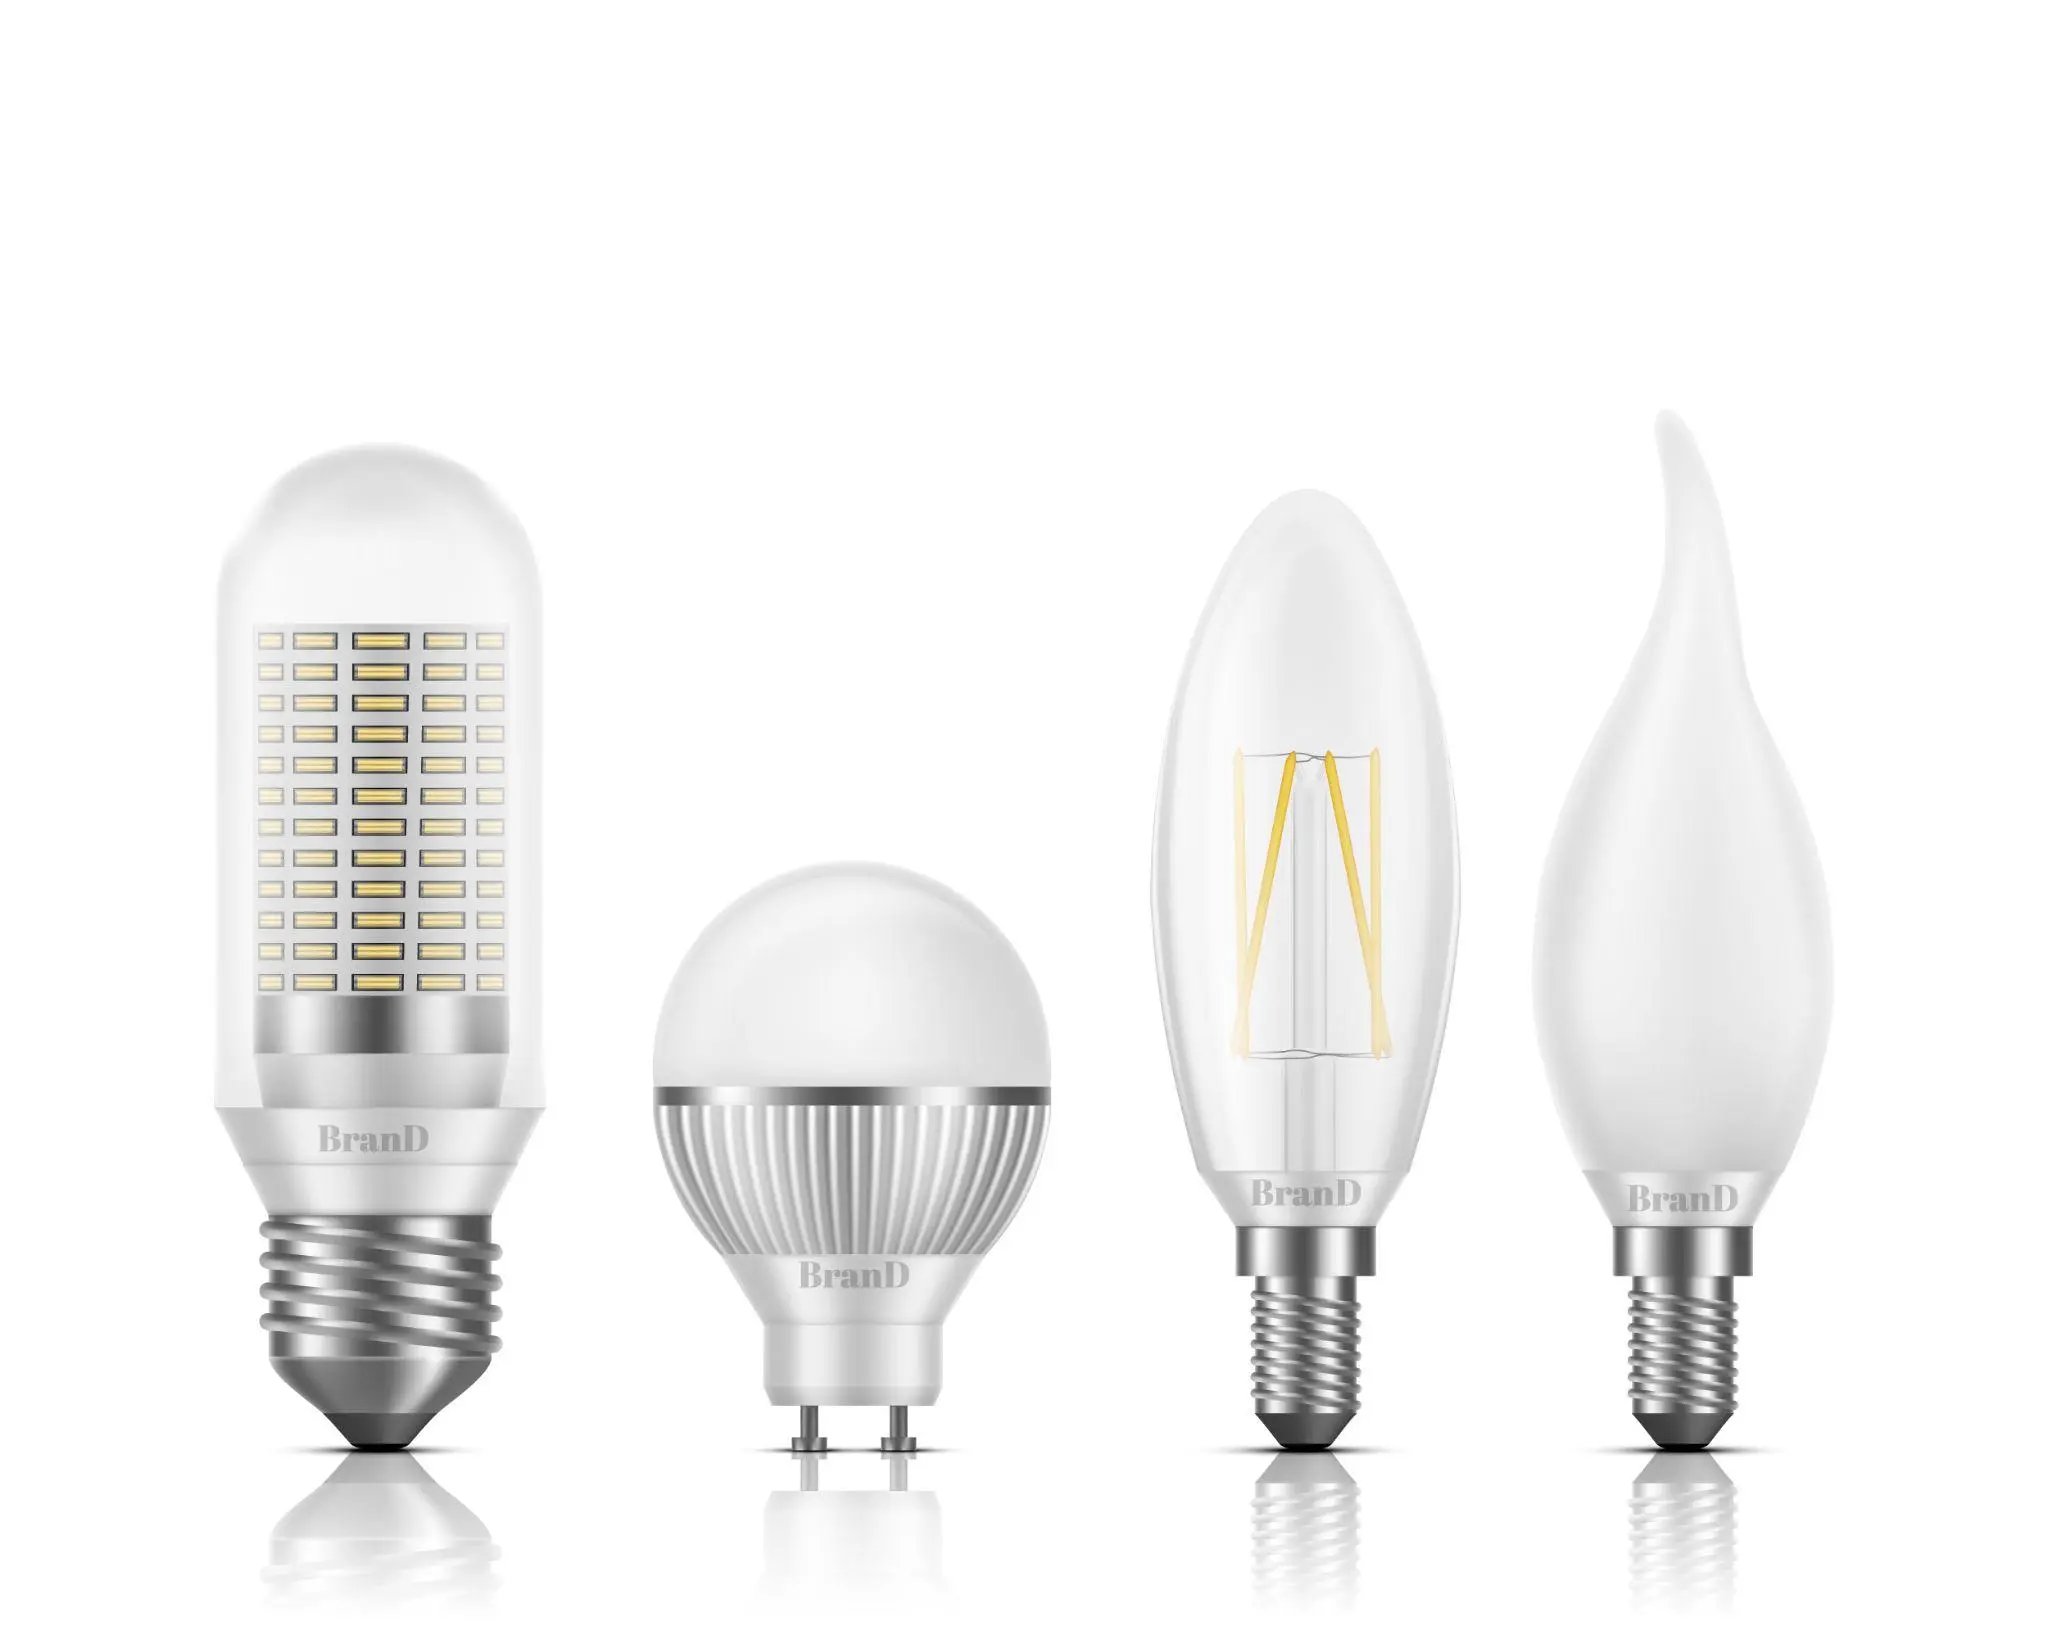 Flame, globe, tubular, candle shapes light led bulbs with different types